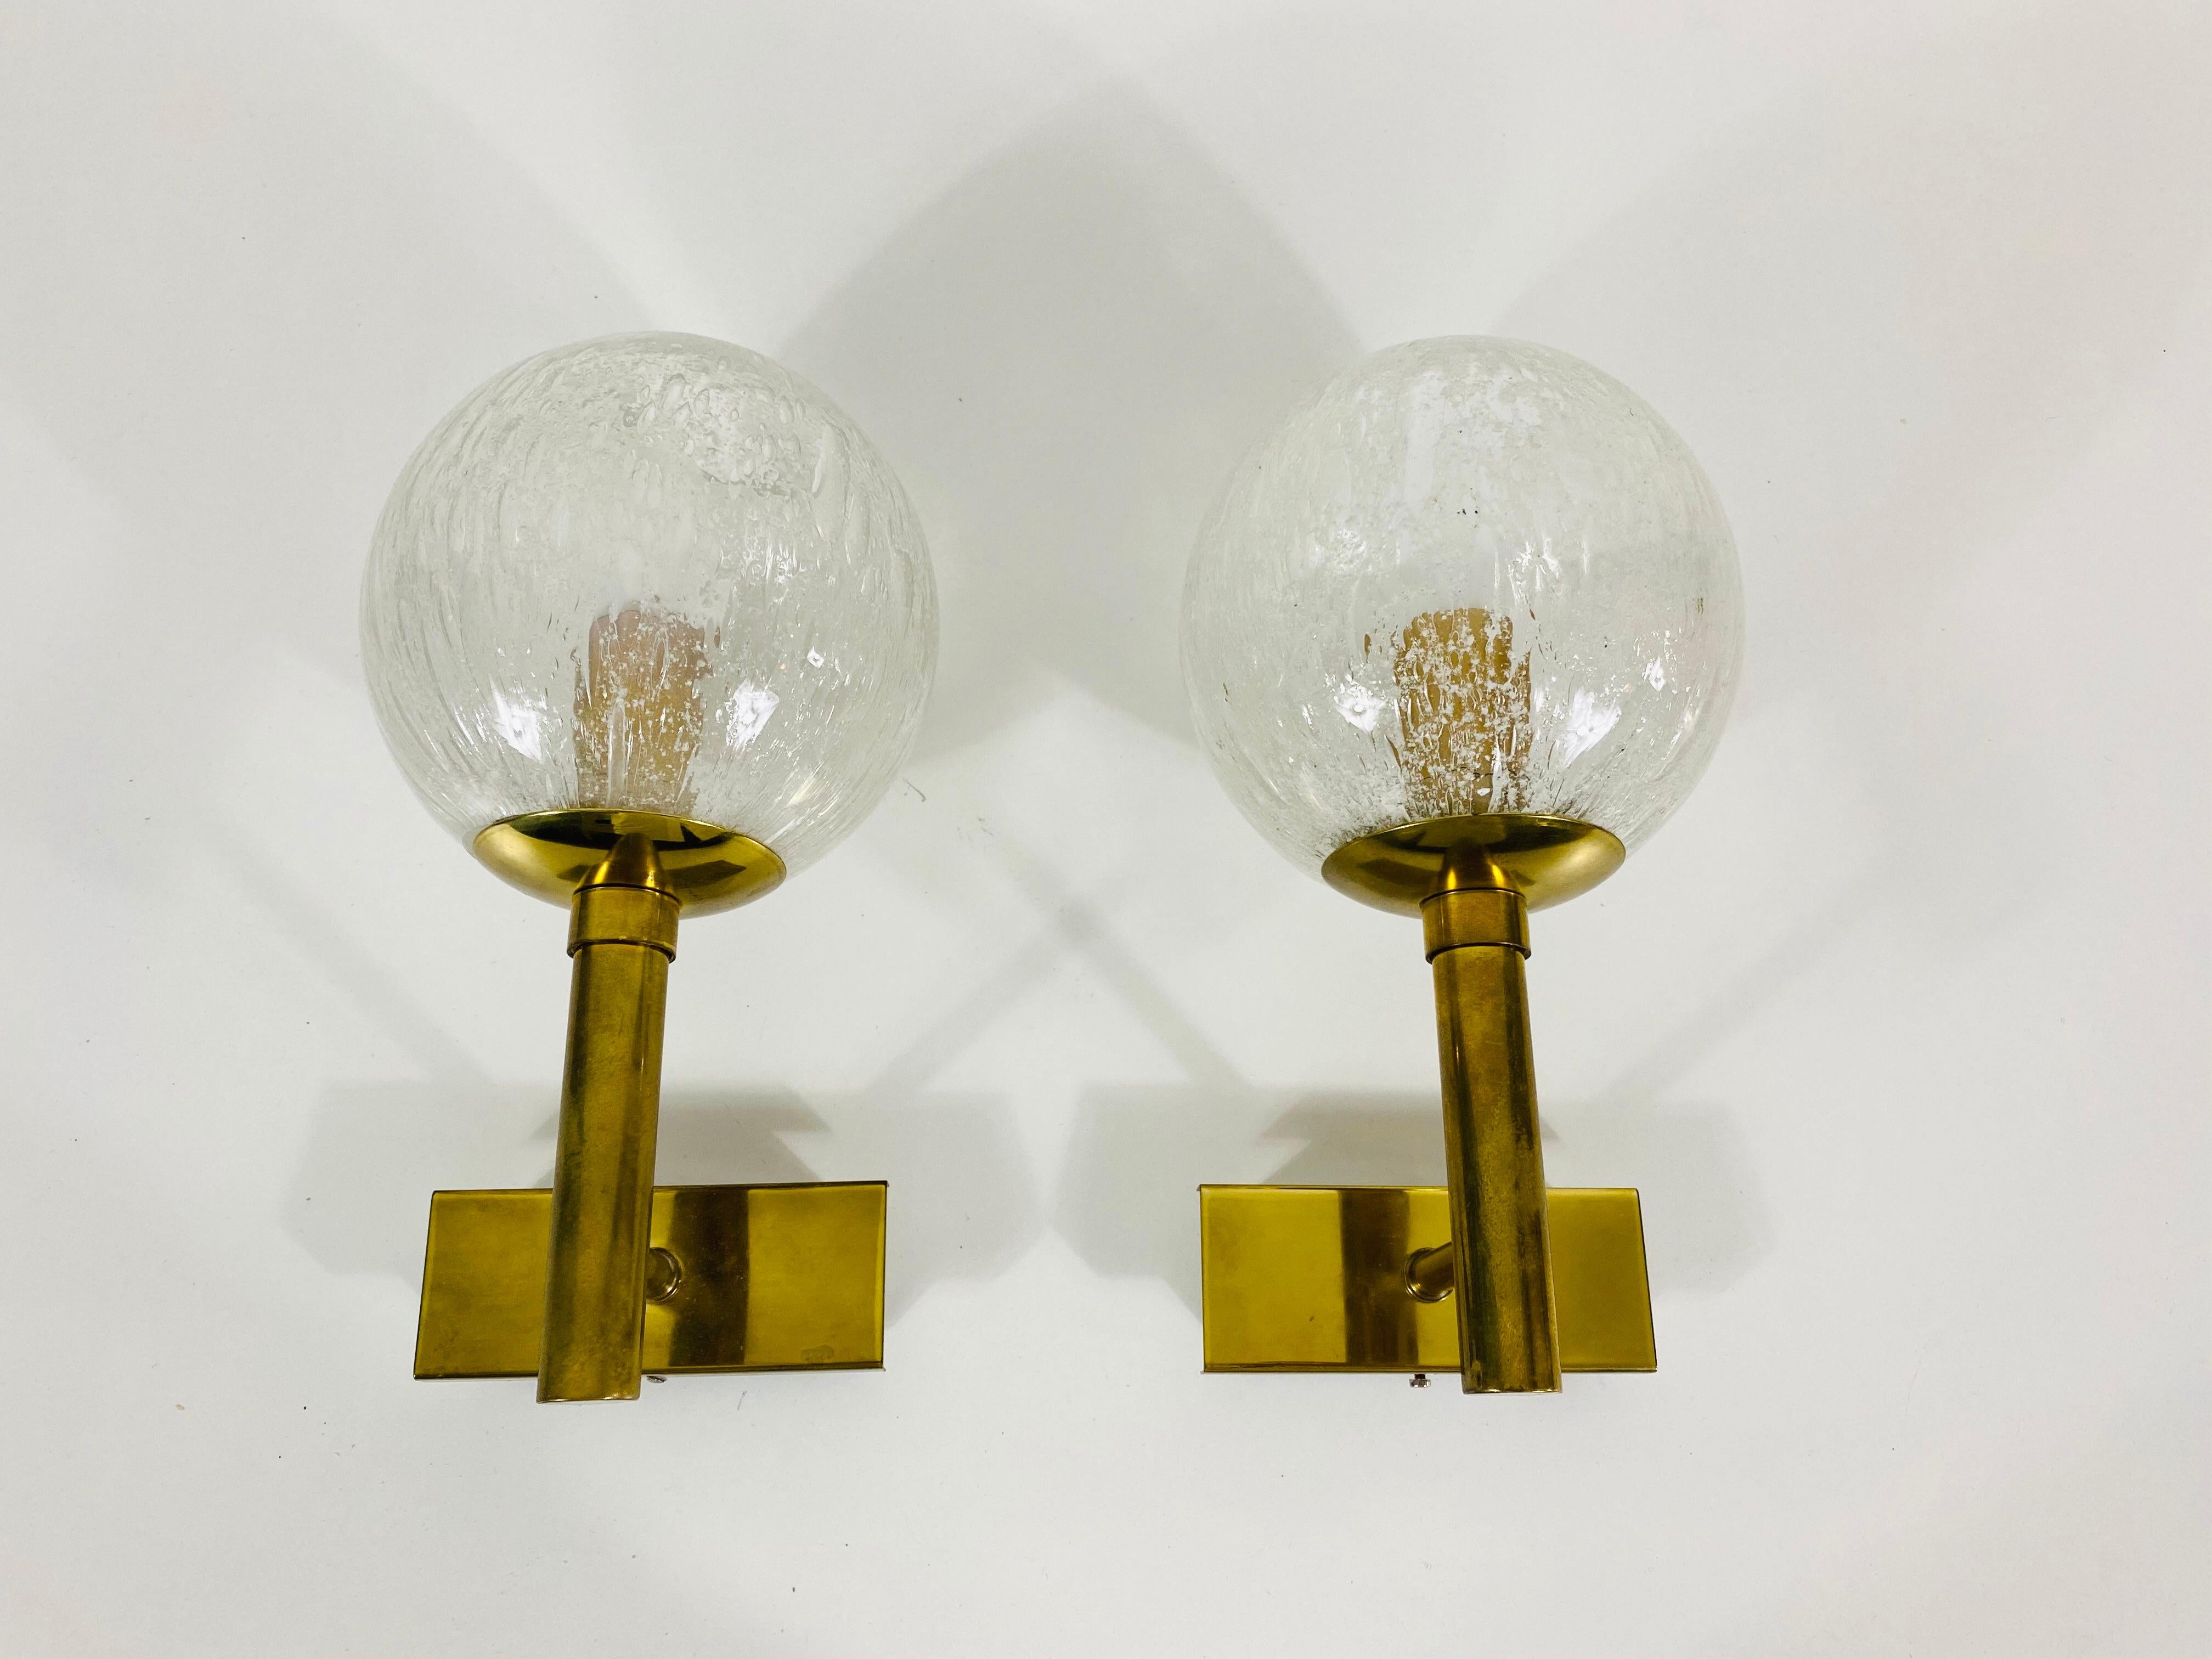 Pair of Hillebrand Brass and Glass Wall Lamps, Germany, 1960s For Sale 3